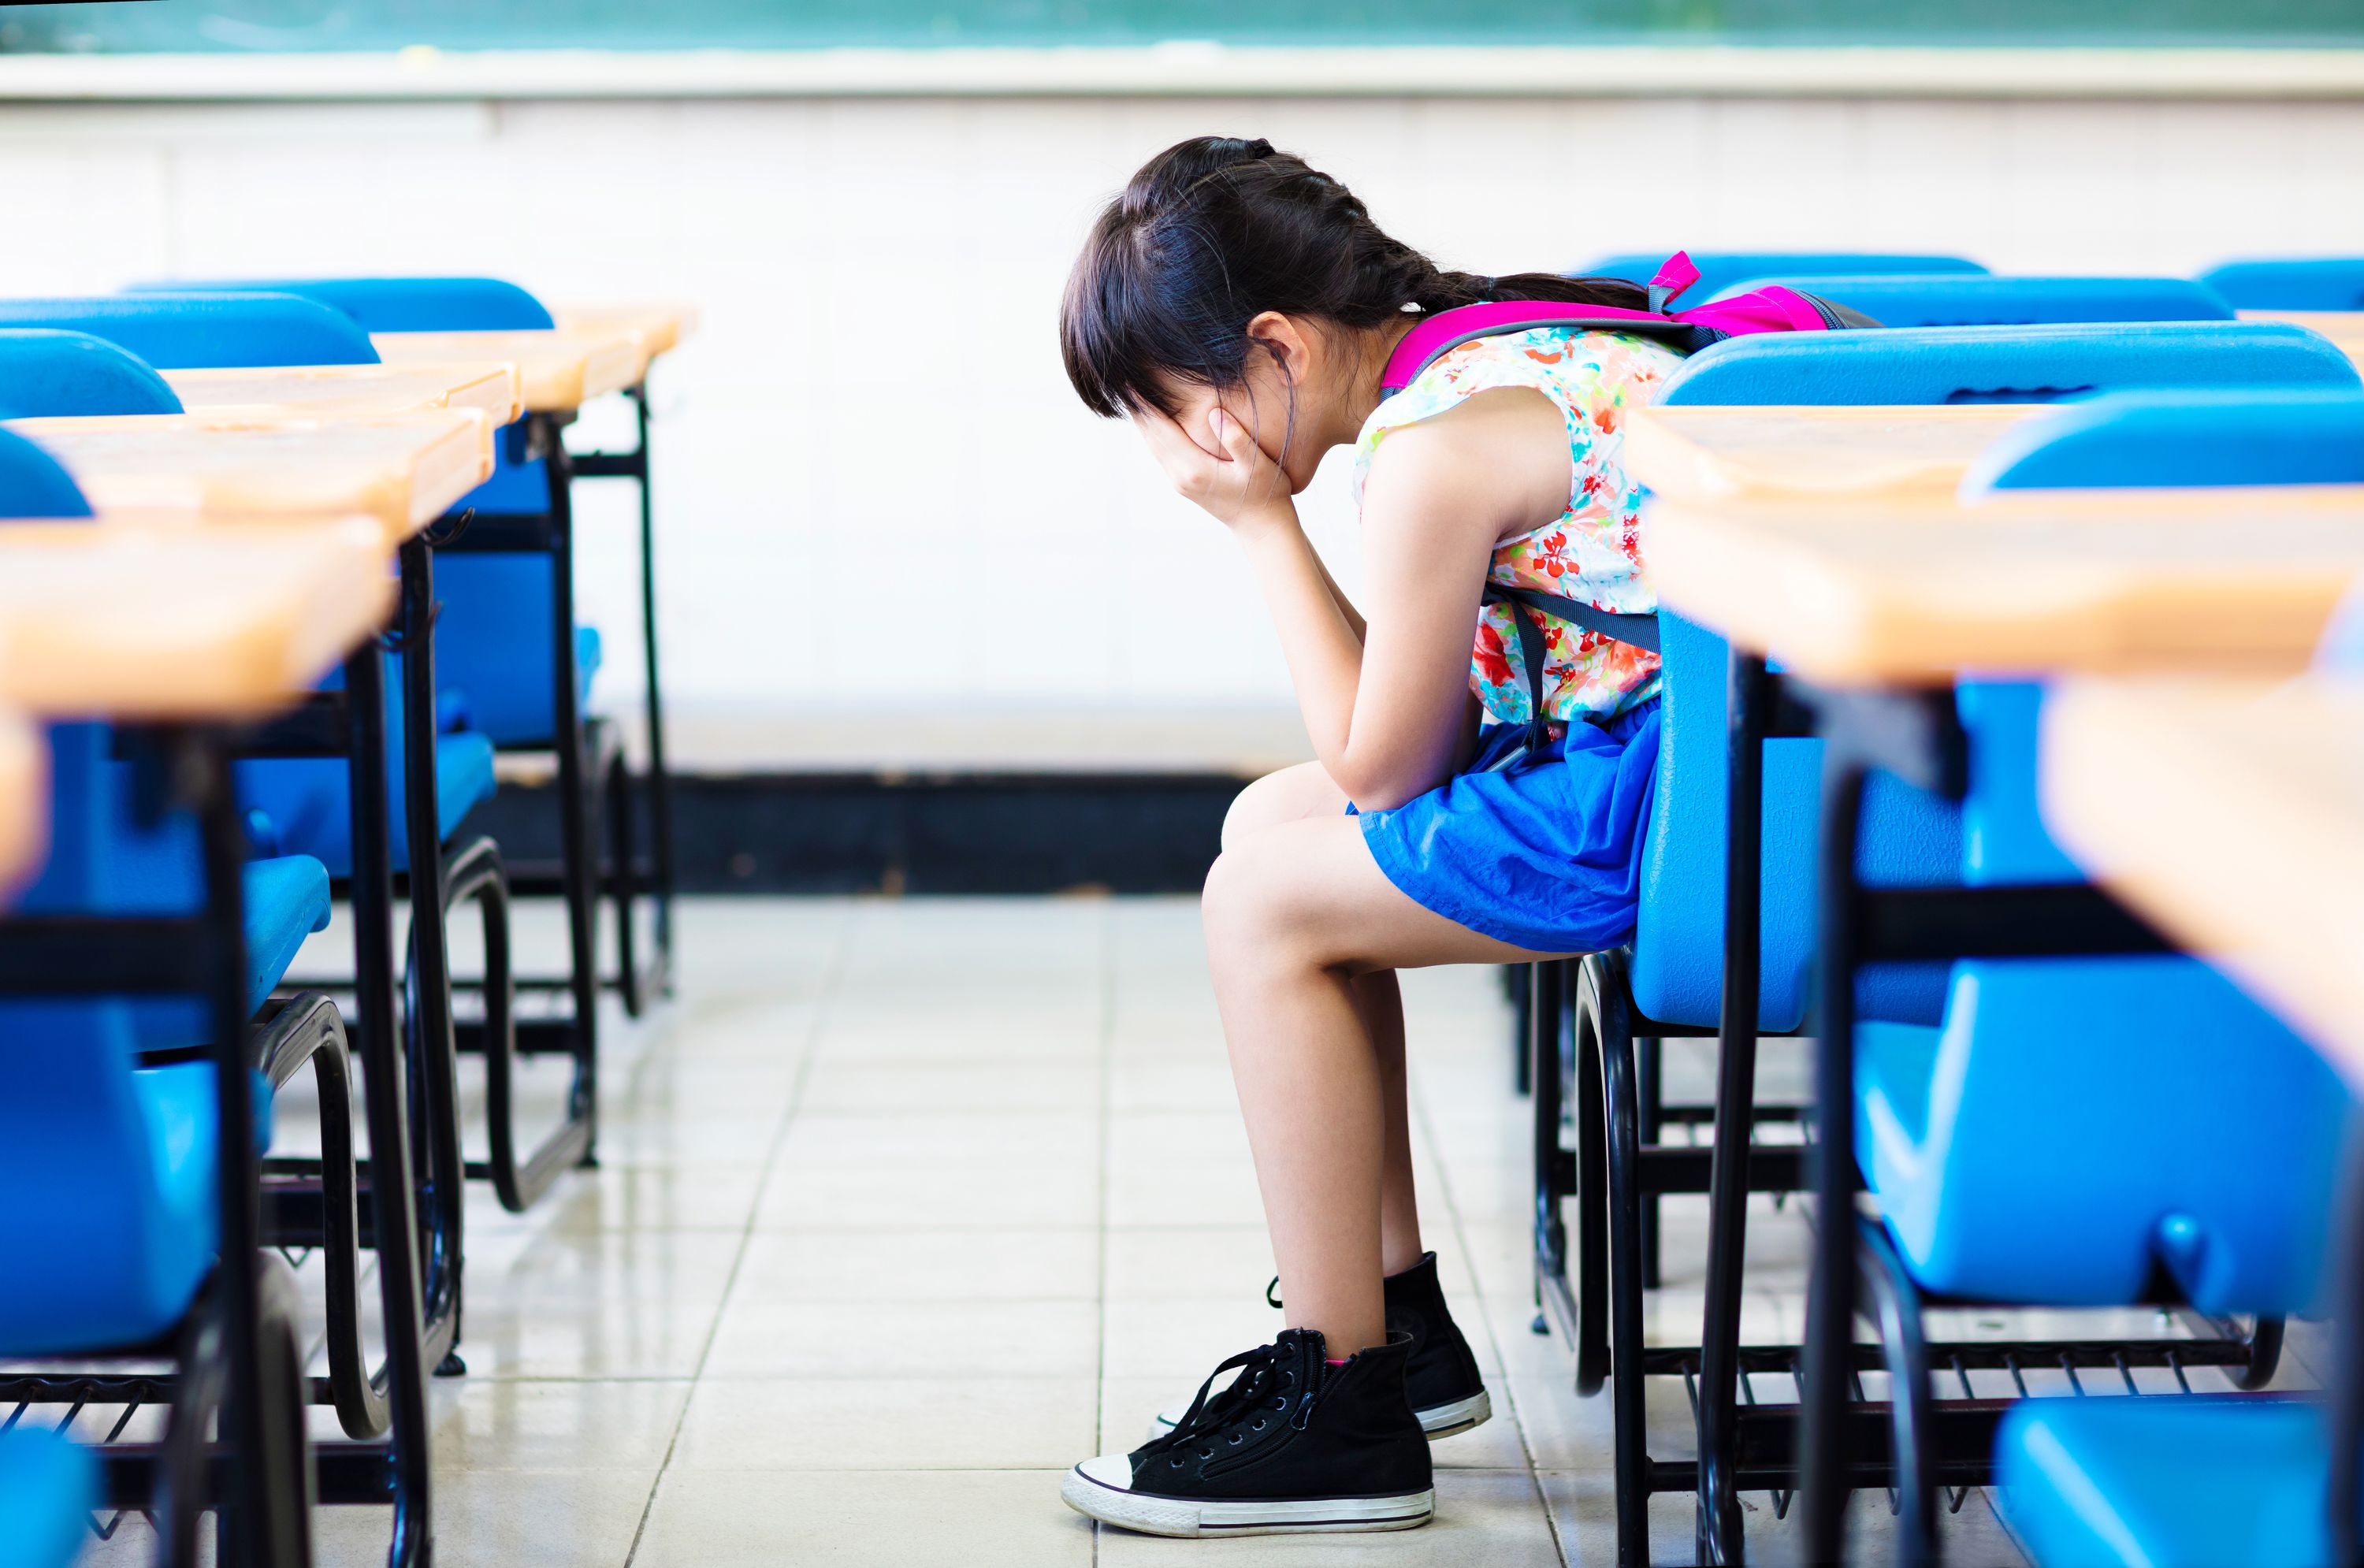 Craig Kielburger: Students in Canadian schools are living with trauma